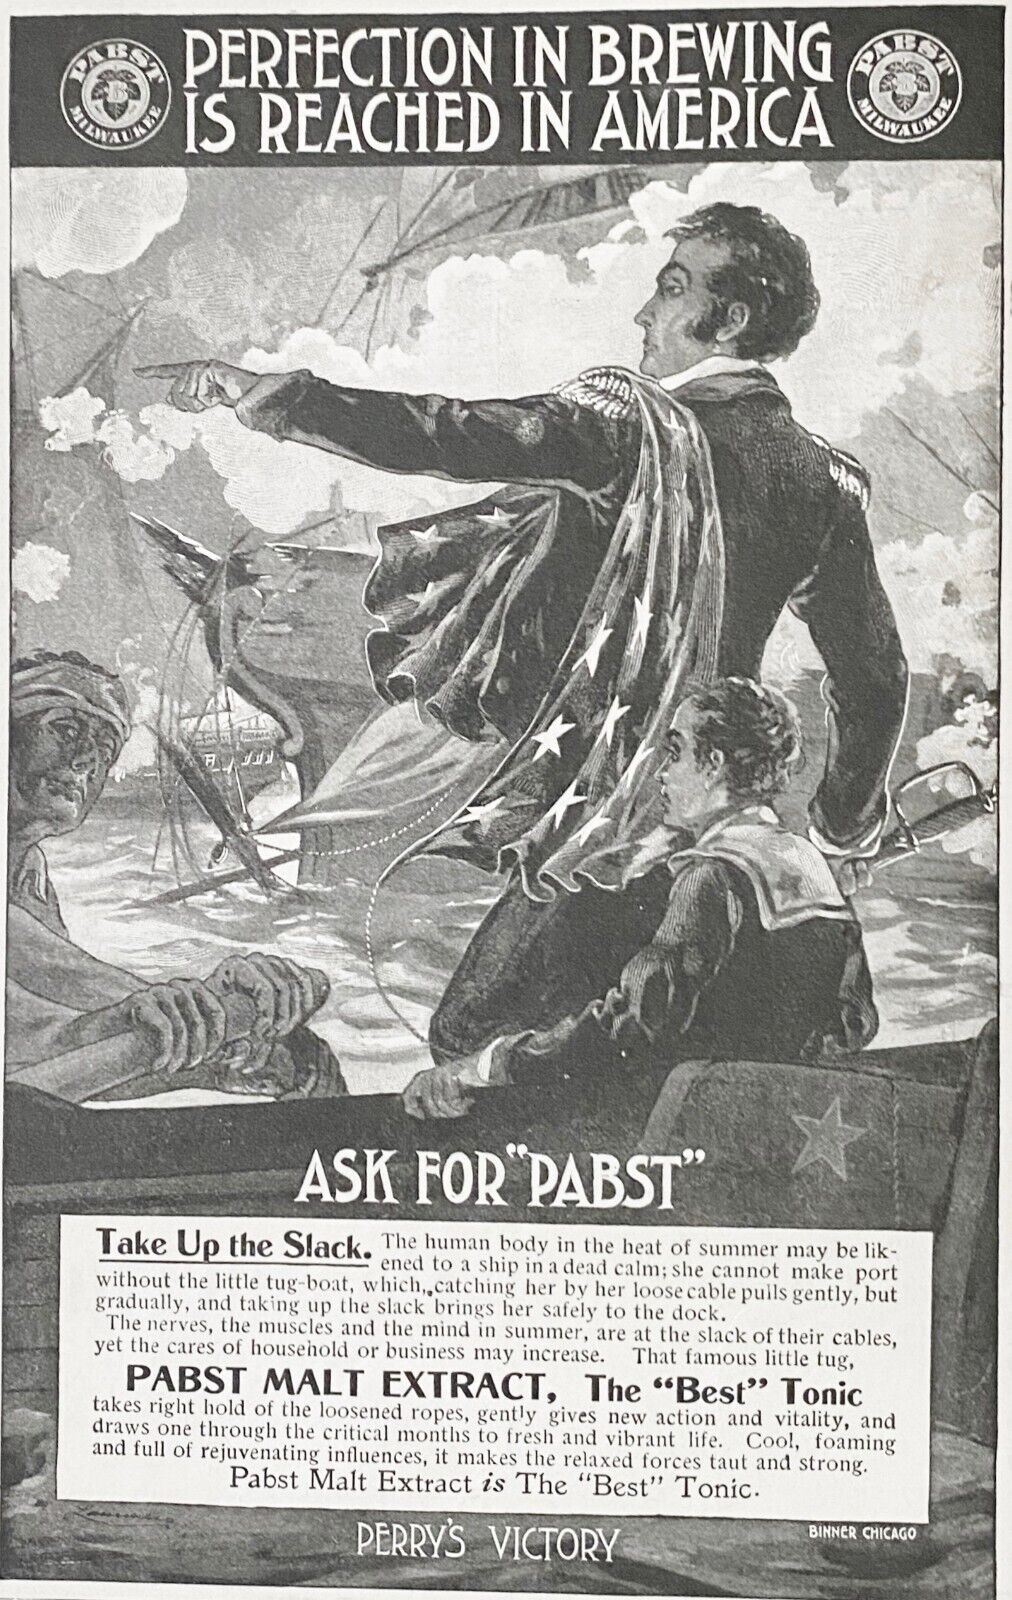 1897 PABST Vtg Beer Print Ad~Admiral Perry Lake Erie Battle Victory War of 1812